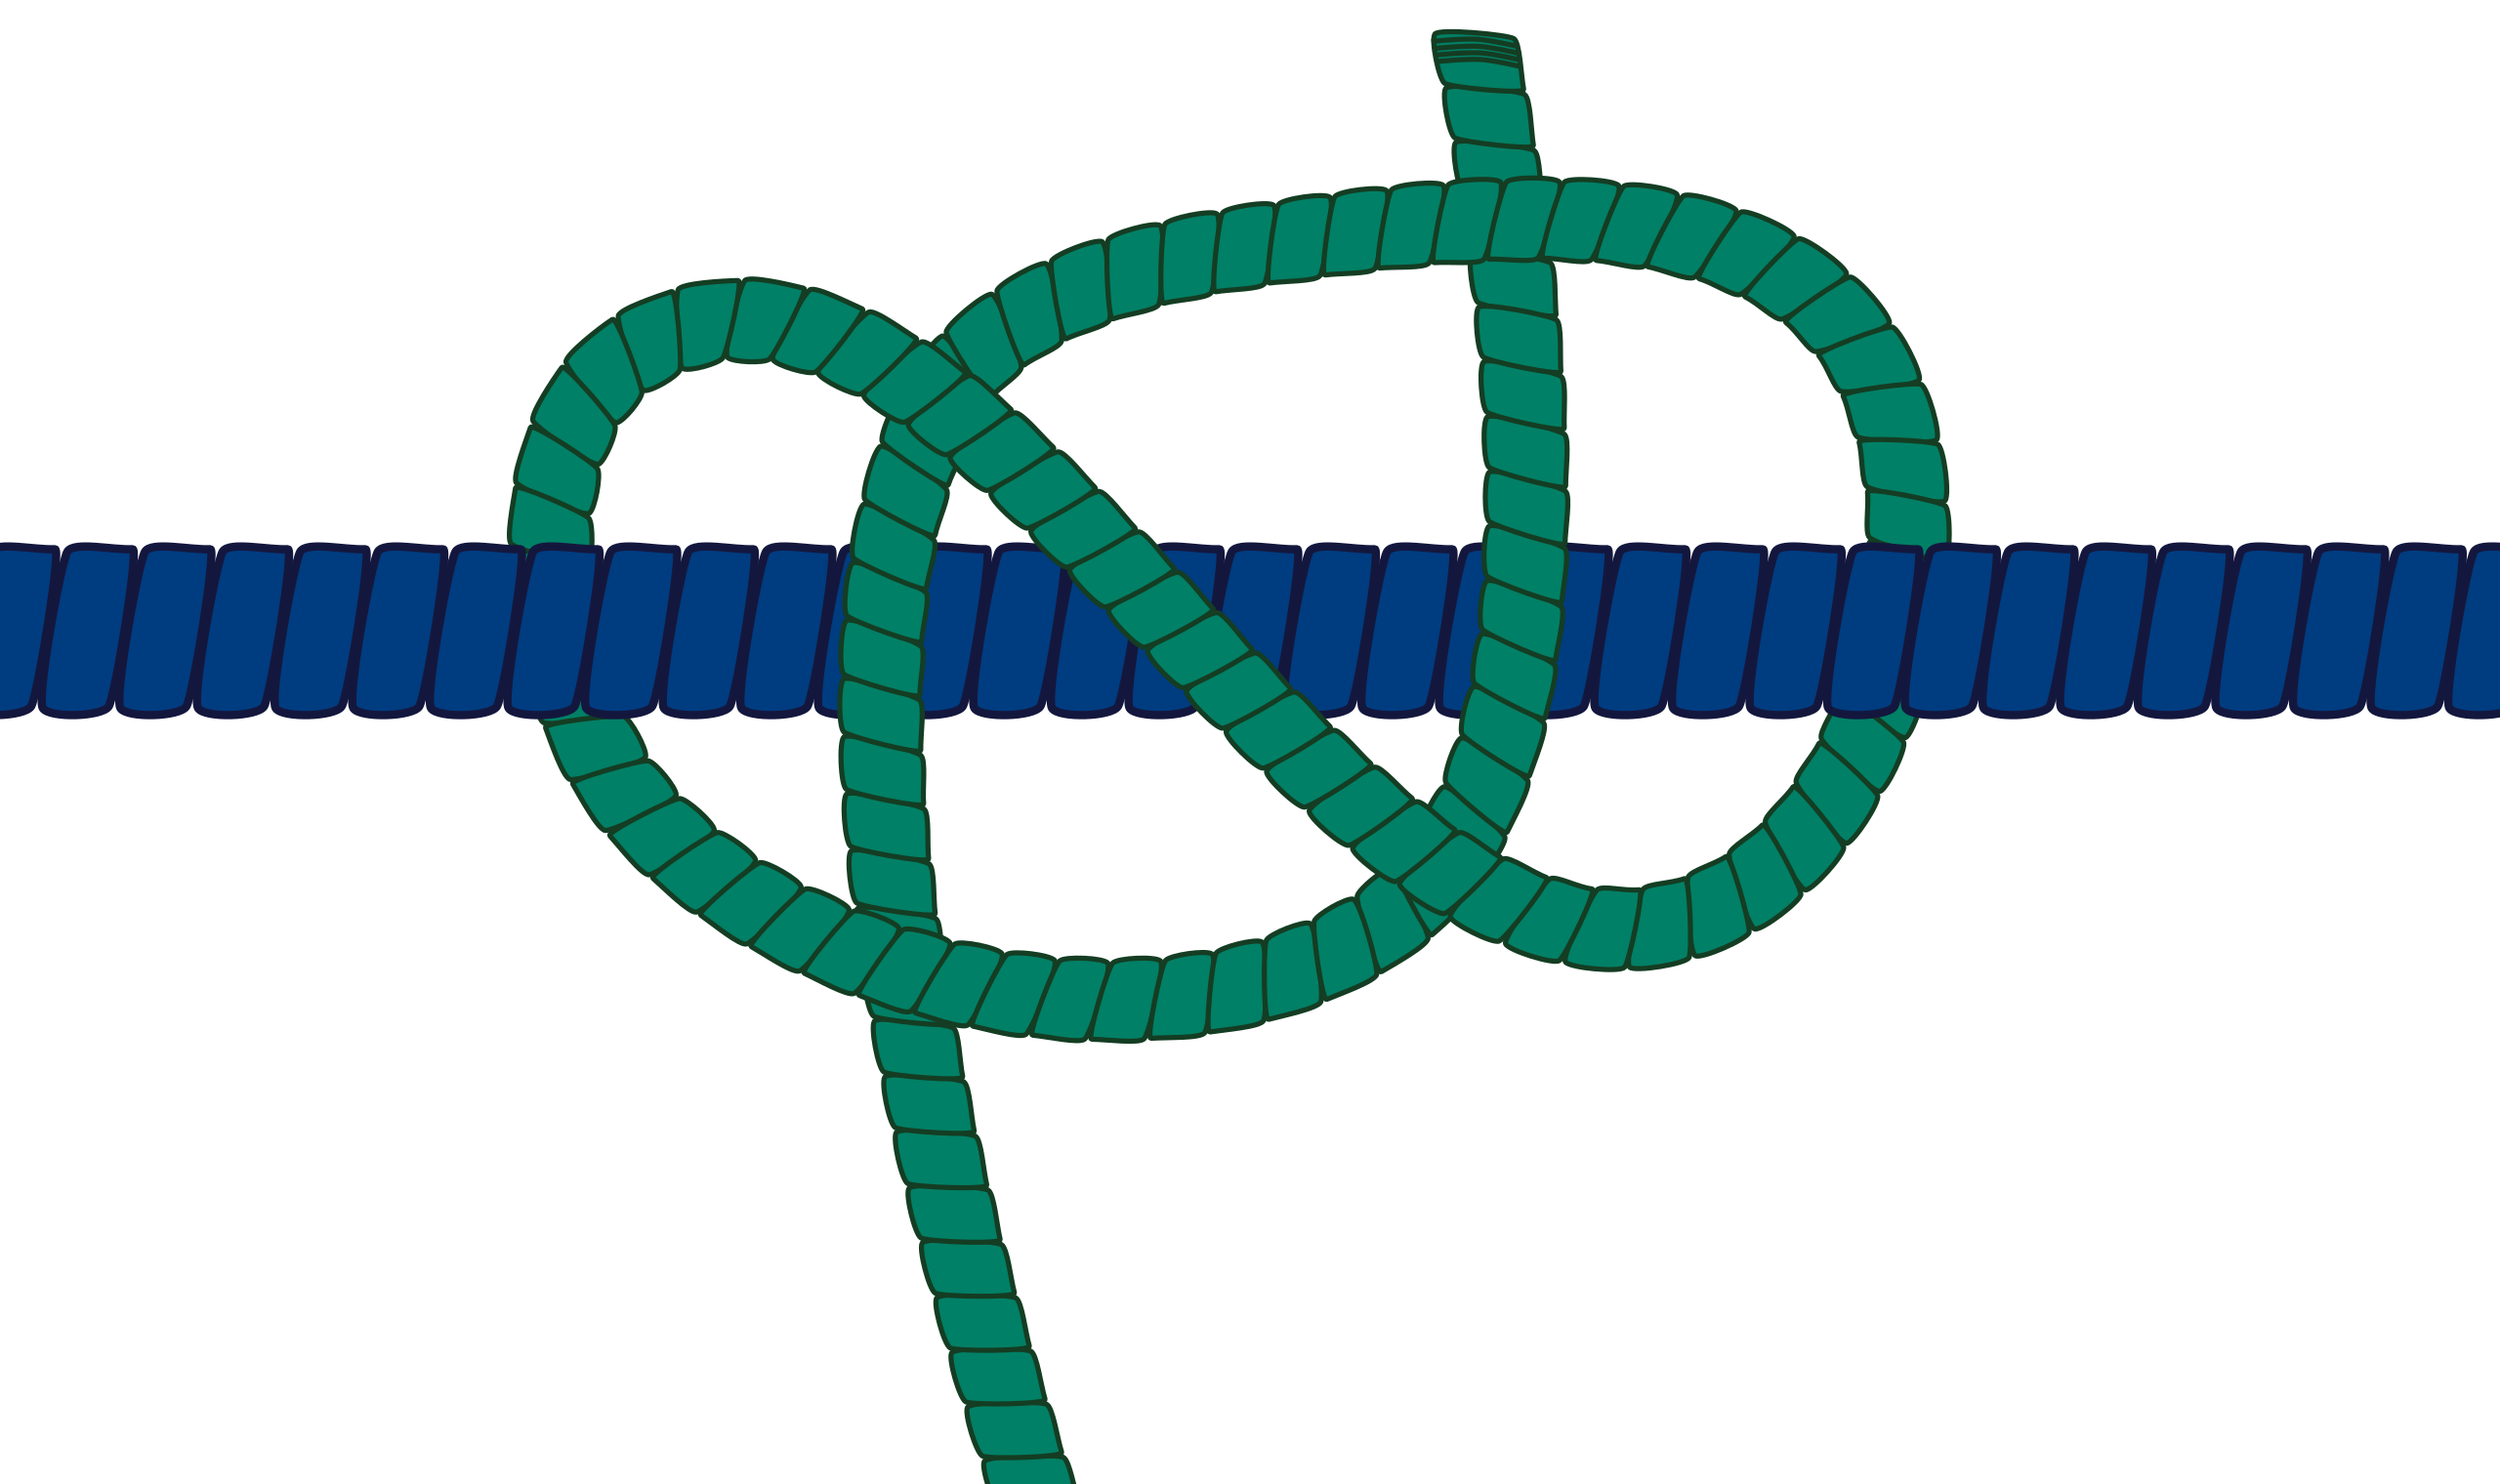 File:Inkscape Constrictor Knot.svg - Wikipedia